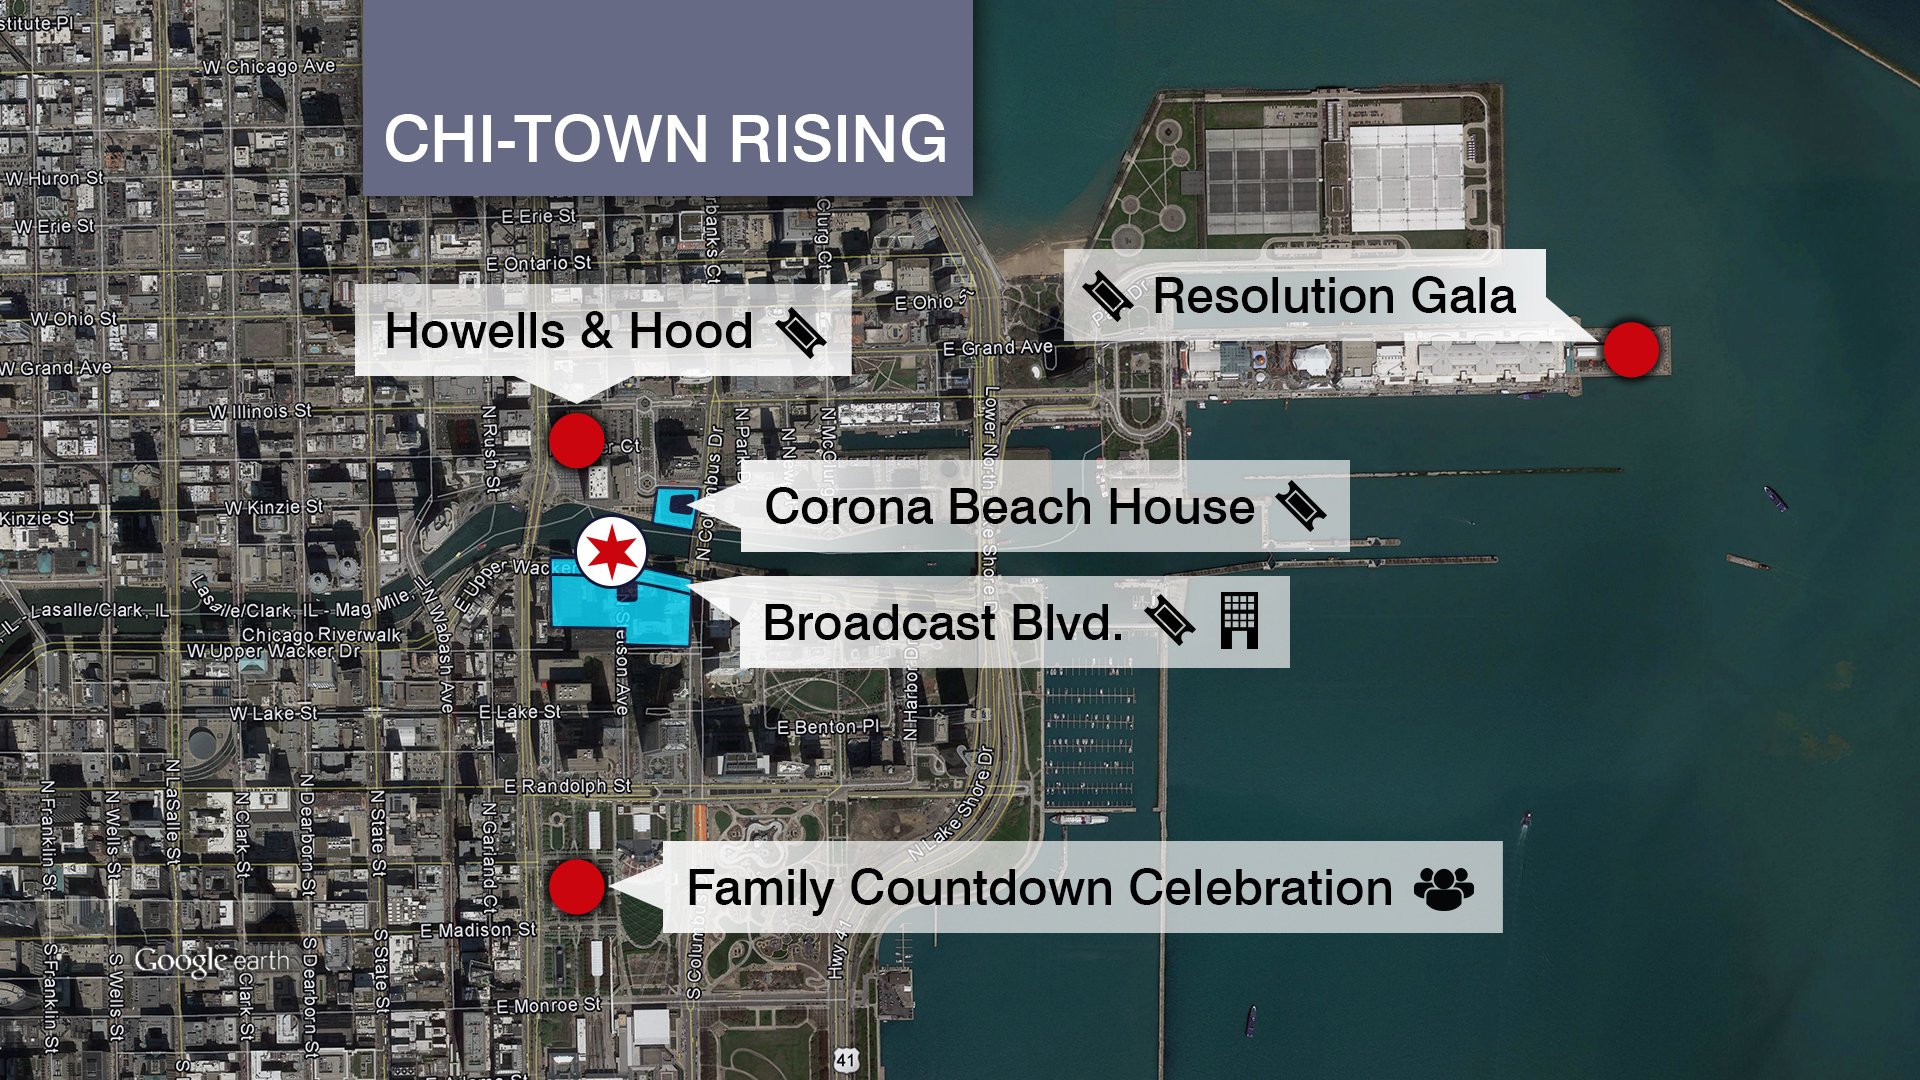 A map shows the locations of Chi-Town Rising events